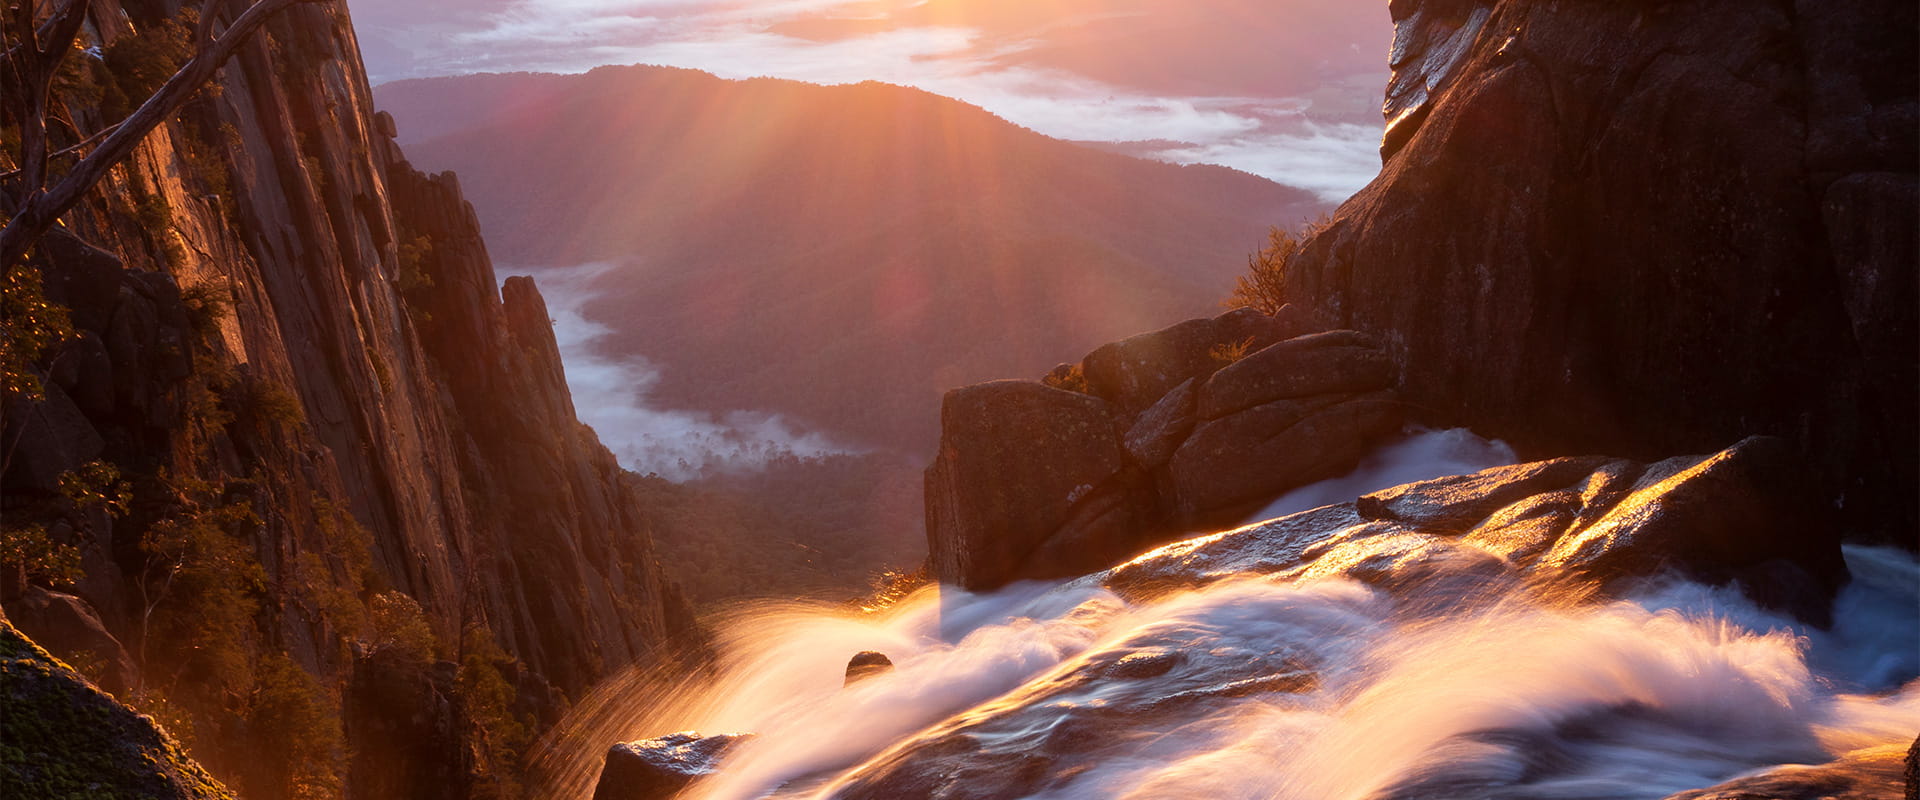 Water cascading over rocks in the mountains at sunrise.